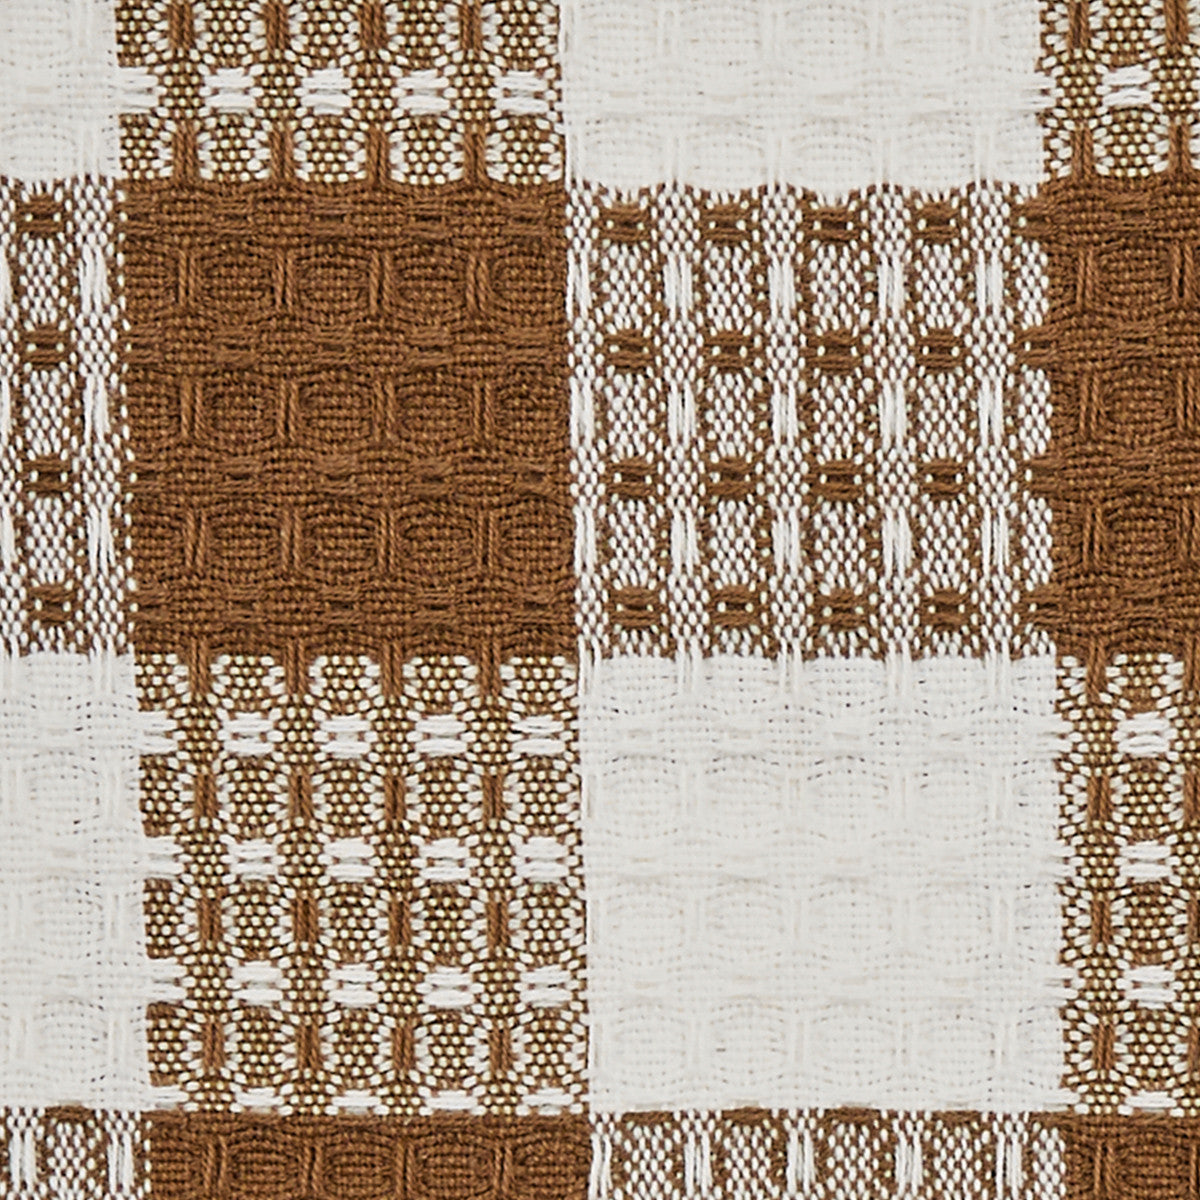 WICKLOW DISHCLOTH-BROWN AND CREAM